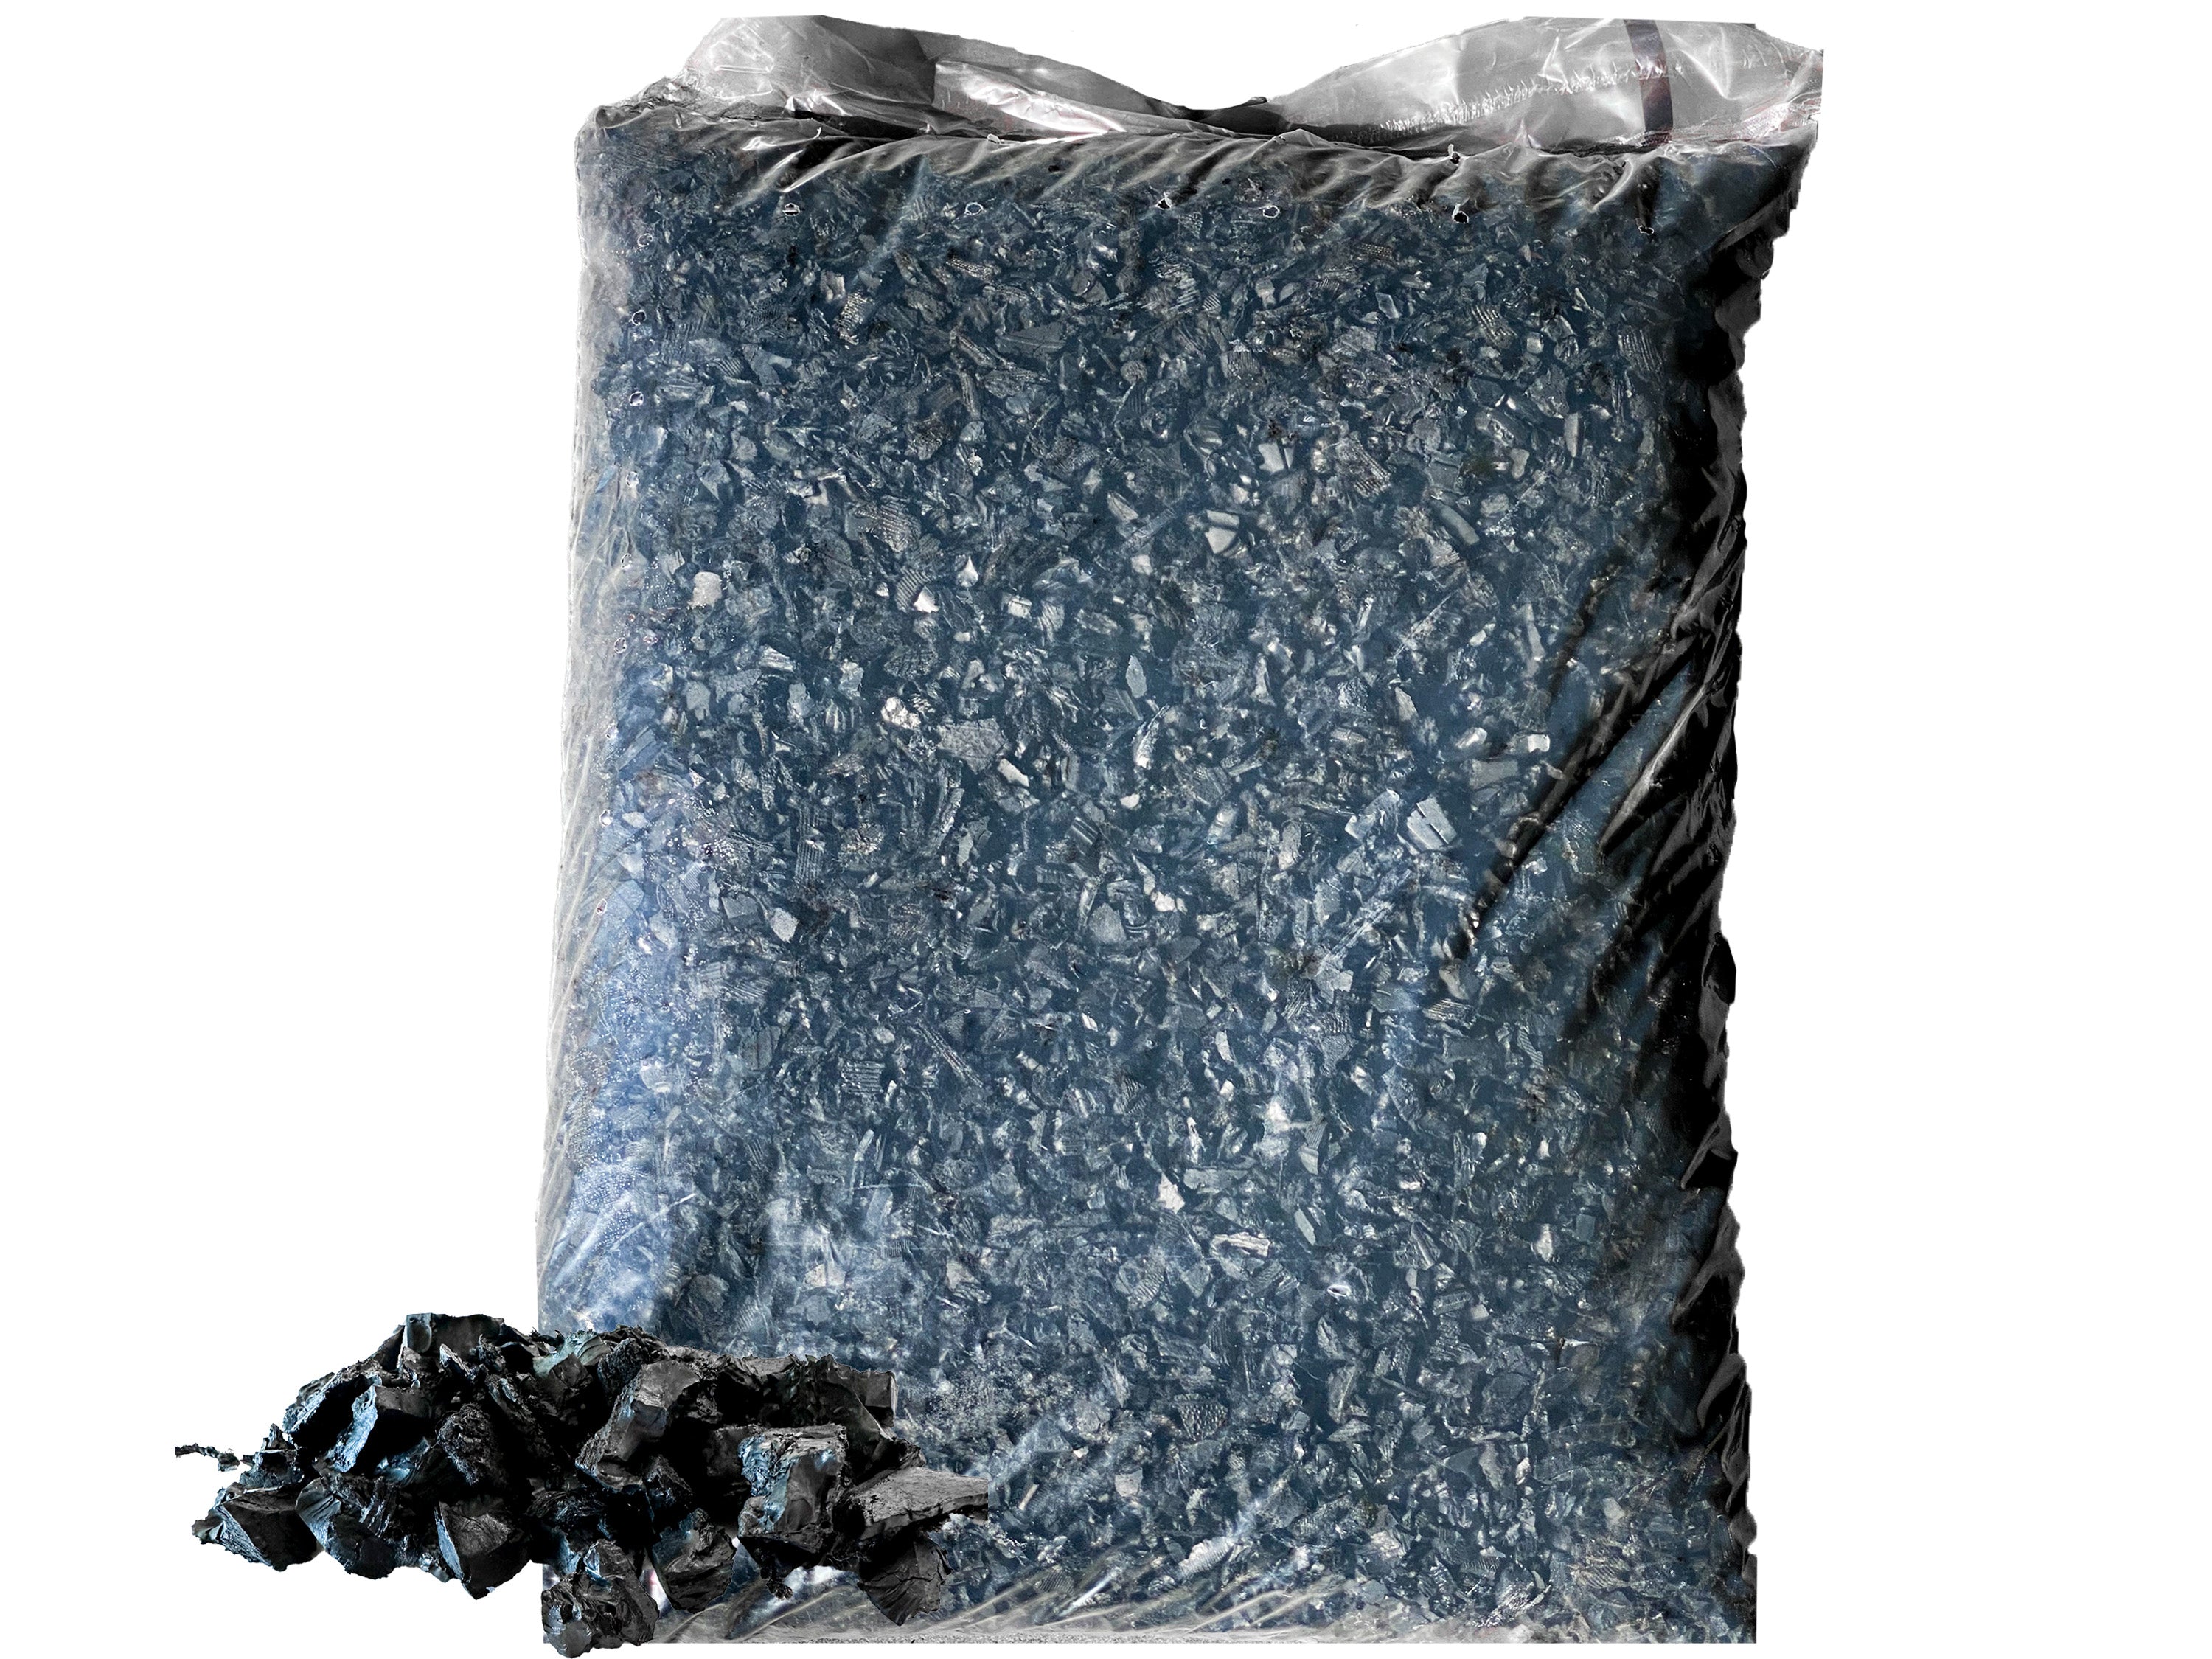 Black Rubber Playground & Landscape Mulch by Viagrow, 1.5 CF Bag ( 11.2 Gallons / 42.3 Liters)